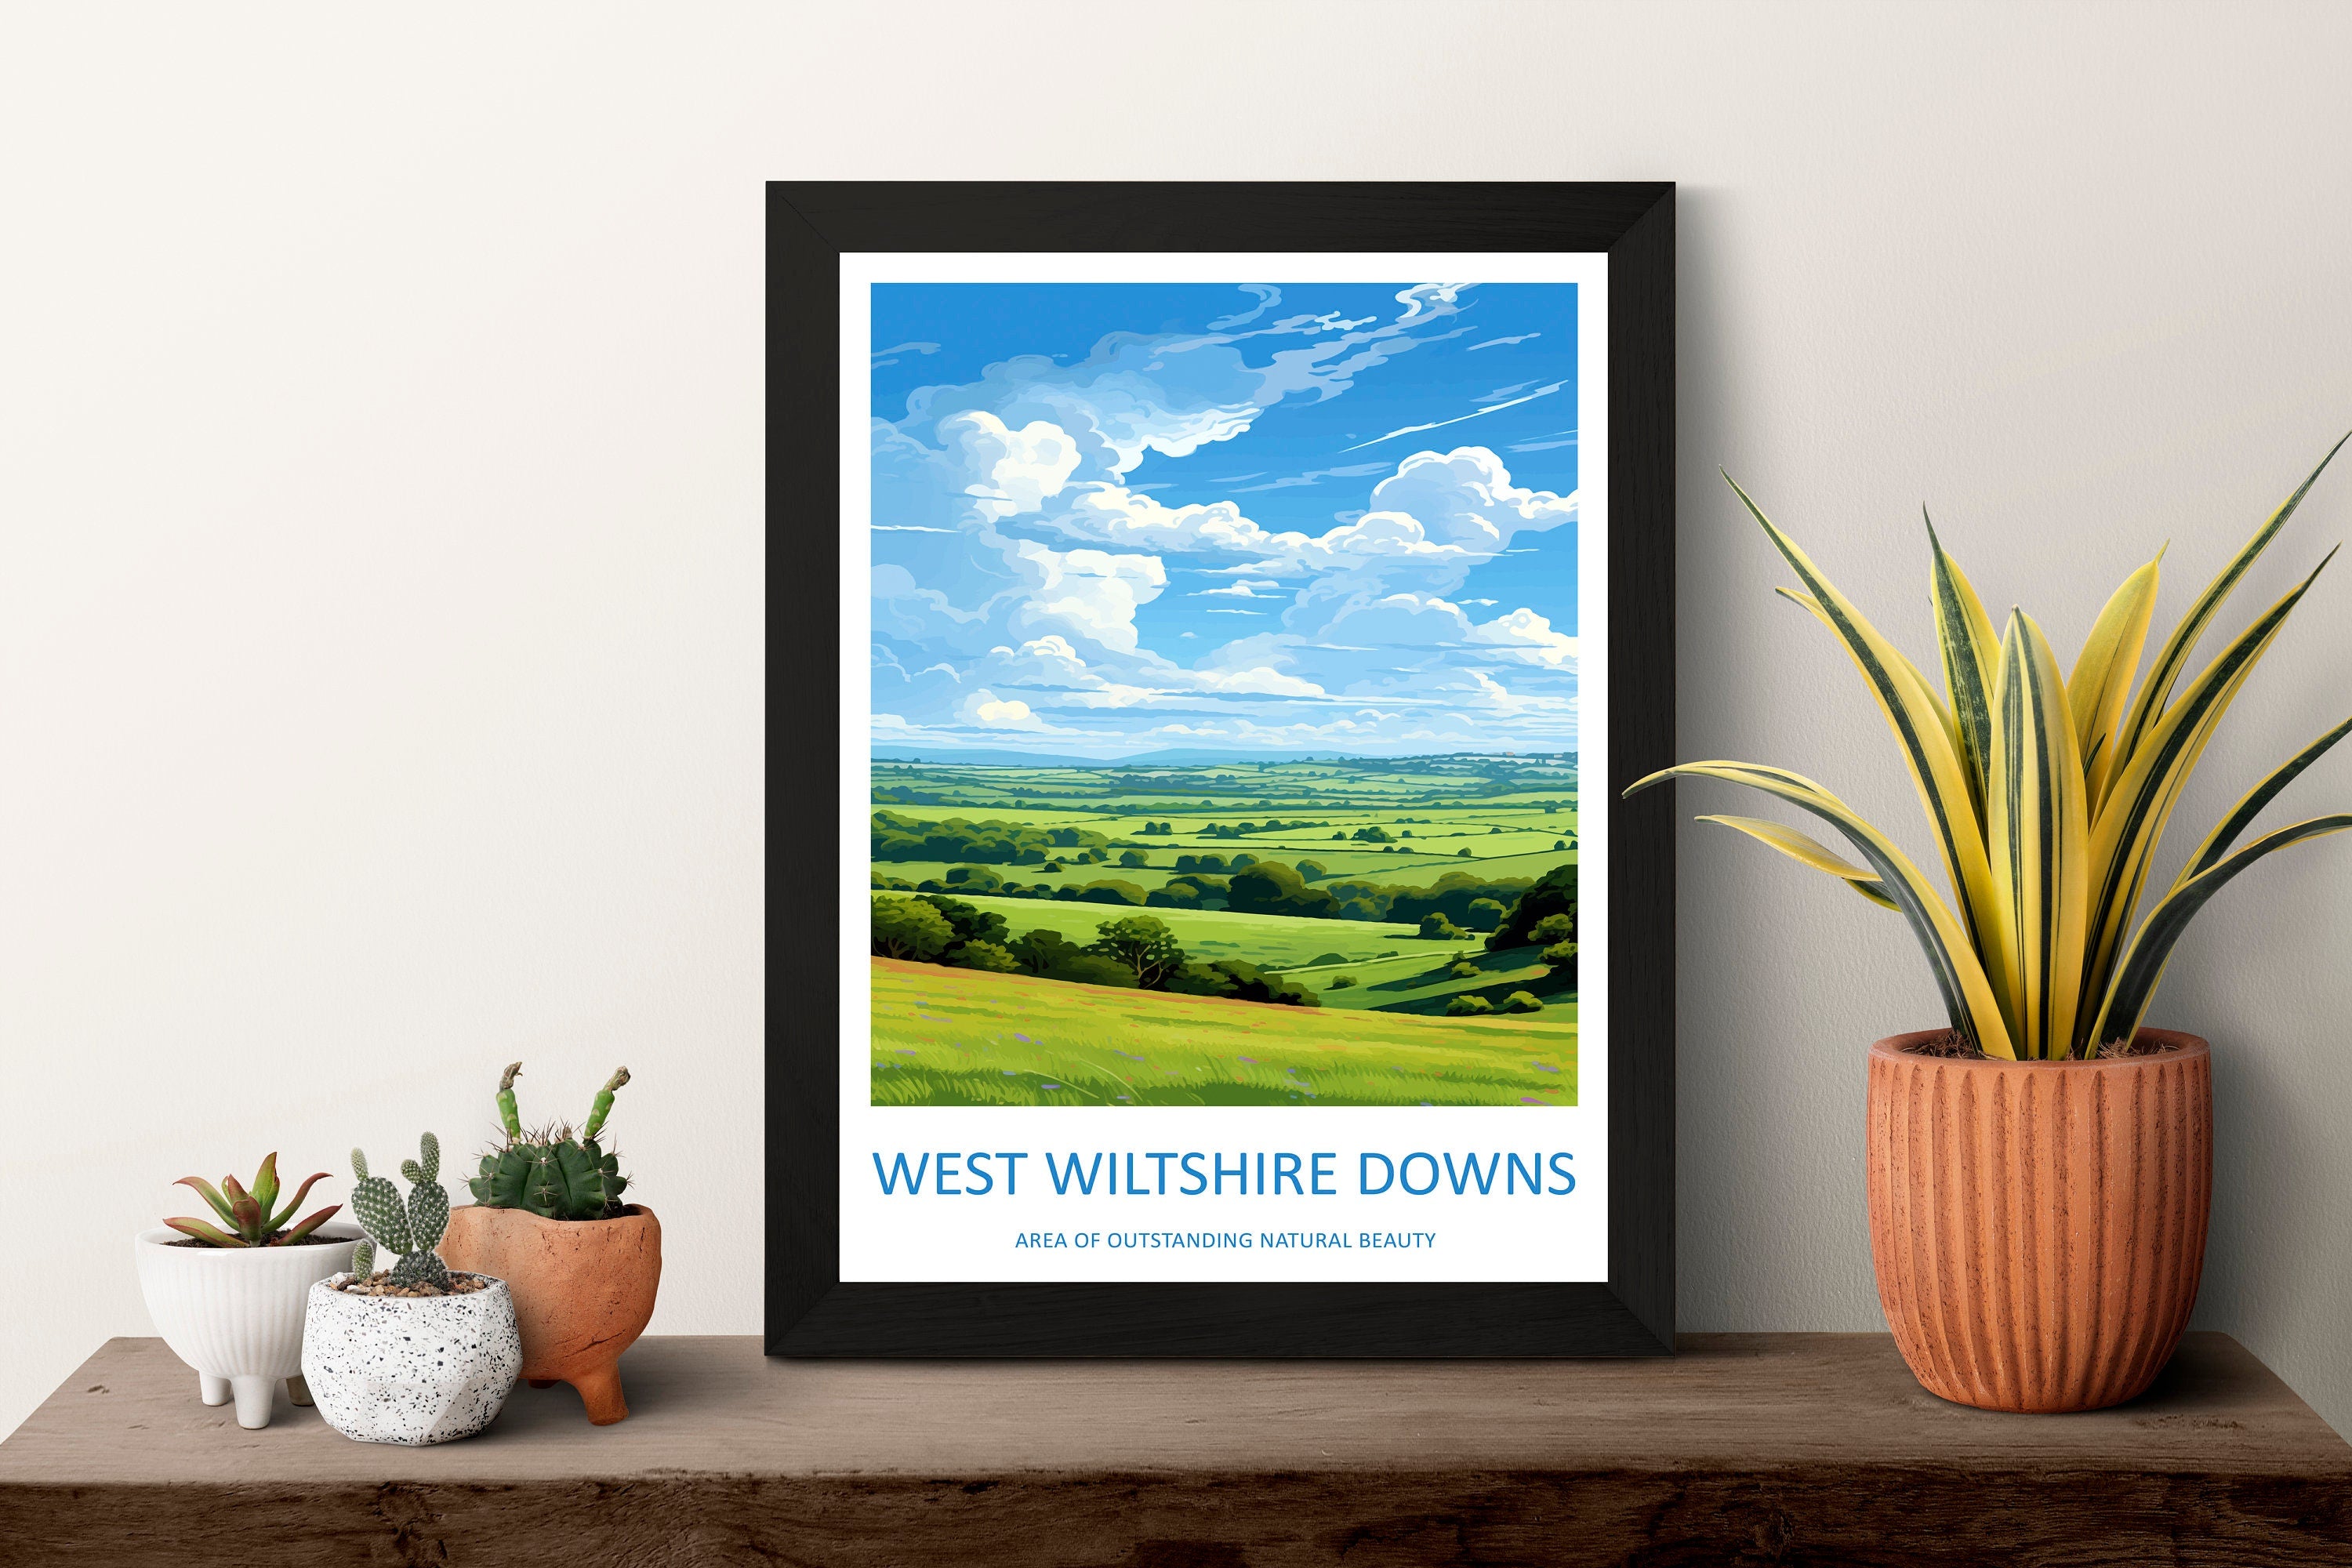 West Wiltshire Downs Travel Print Wall Art West Wiltshire Downs Wall Hanging Home Decor West Wiltshire Downs Gift Art Lovers Wall Art AONB